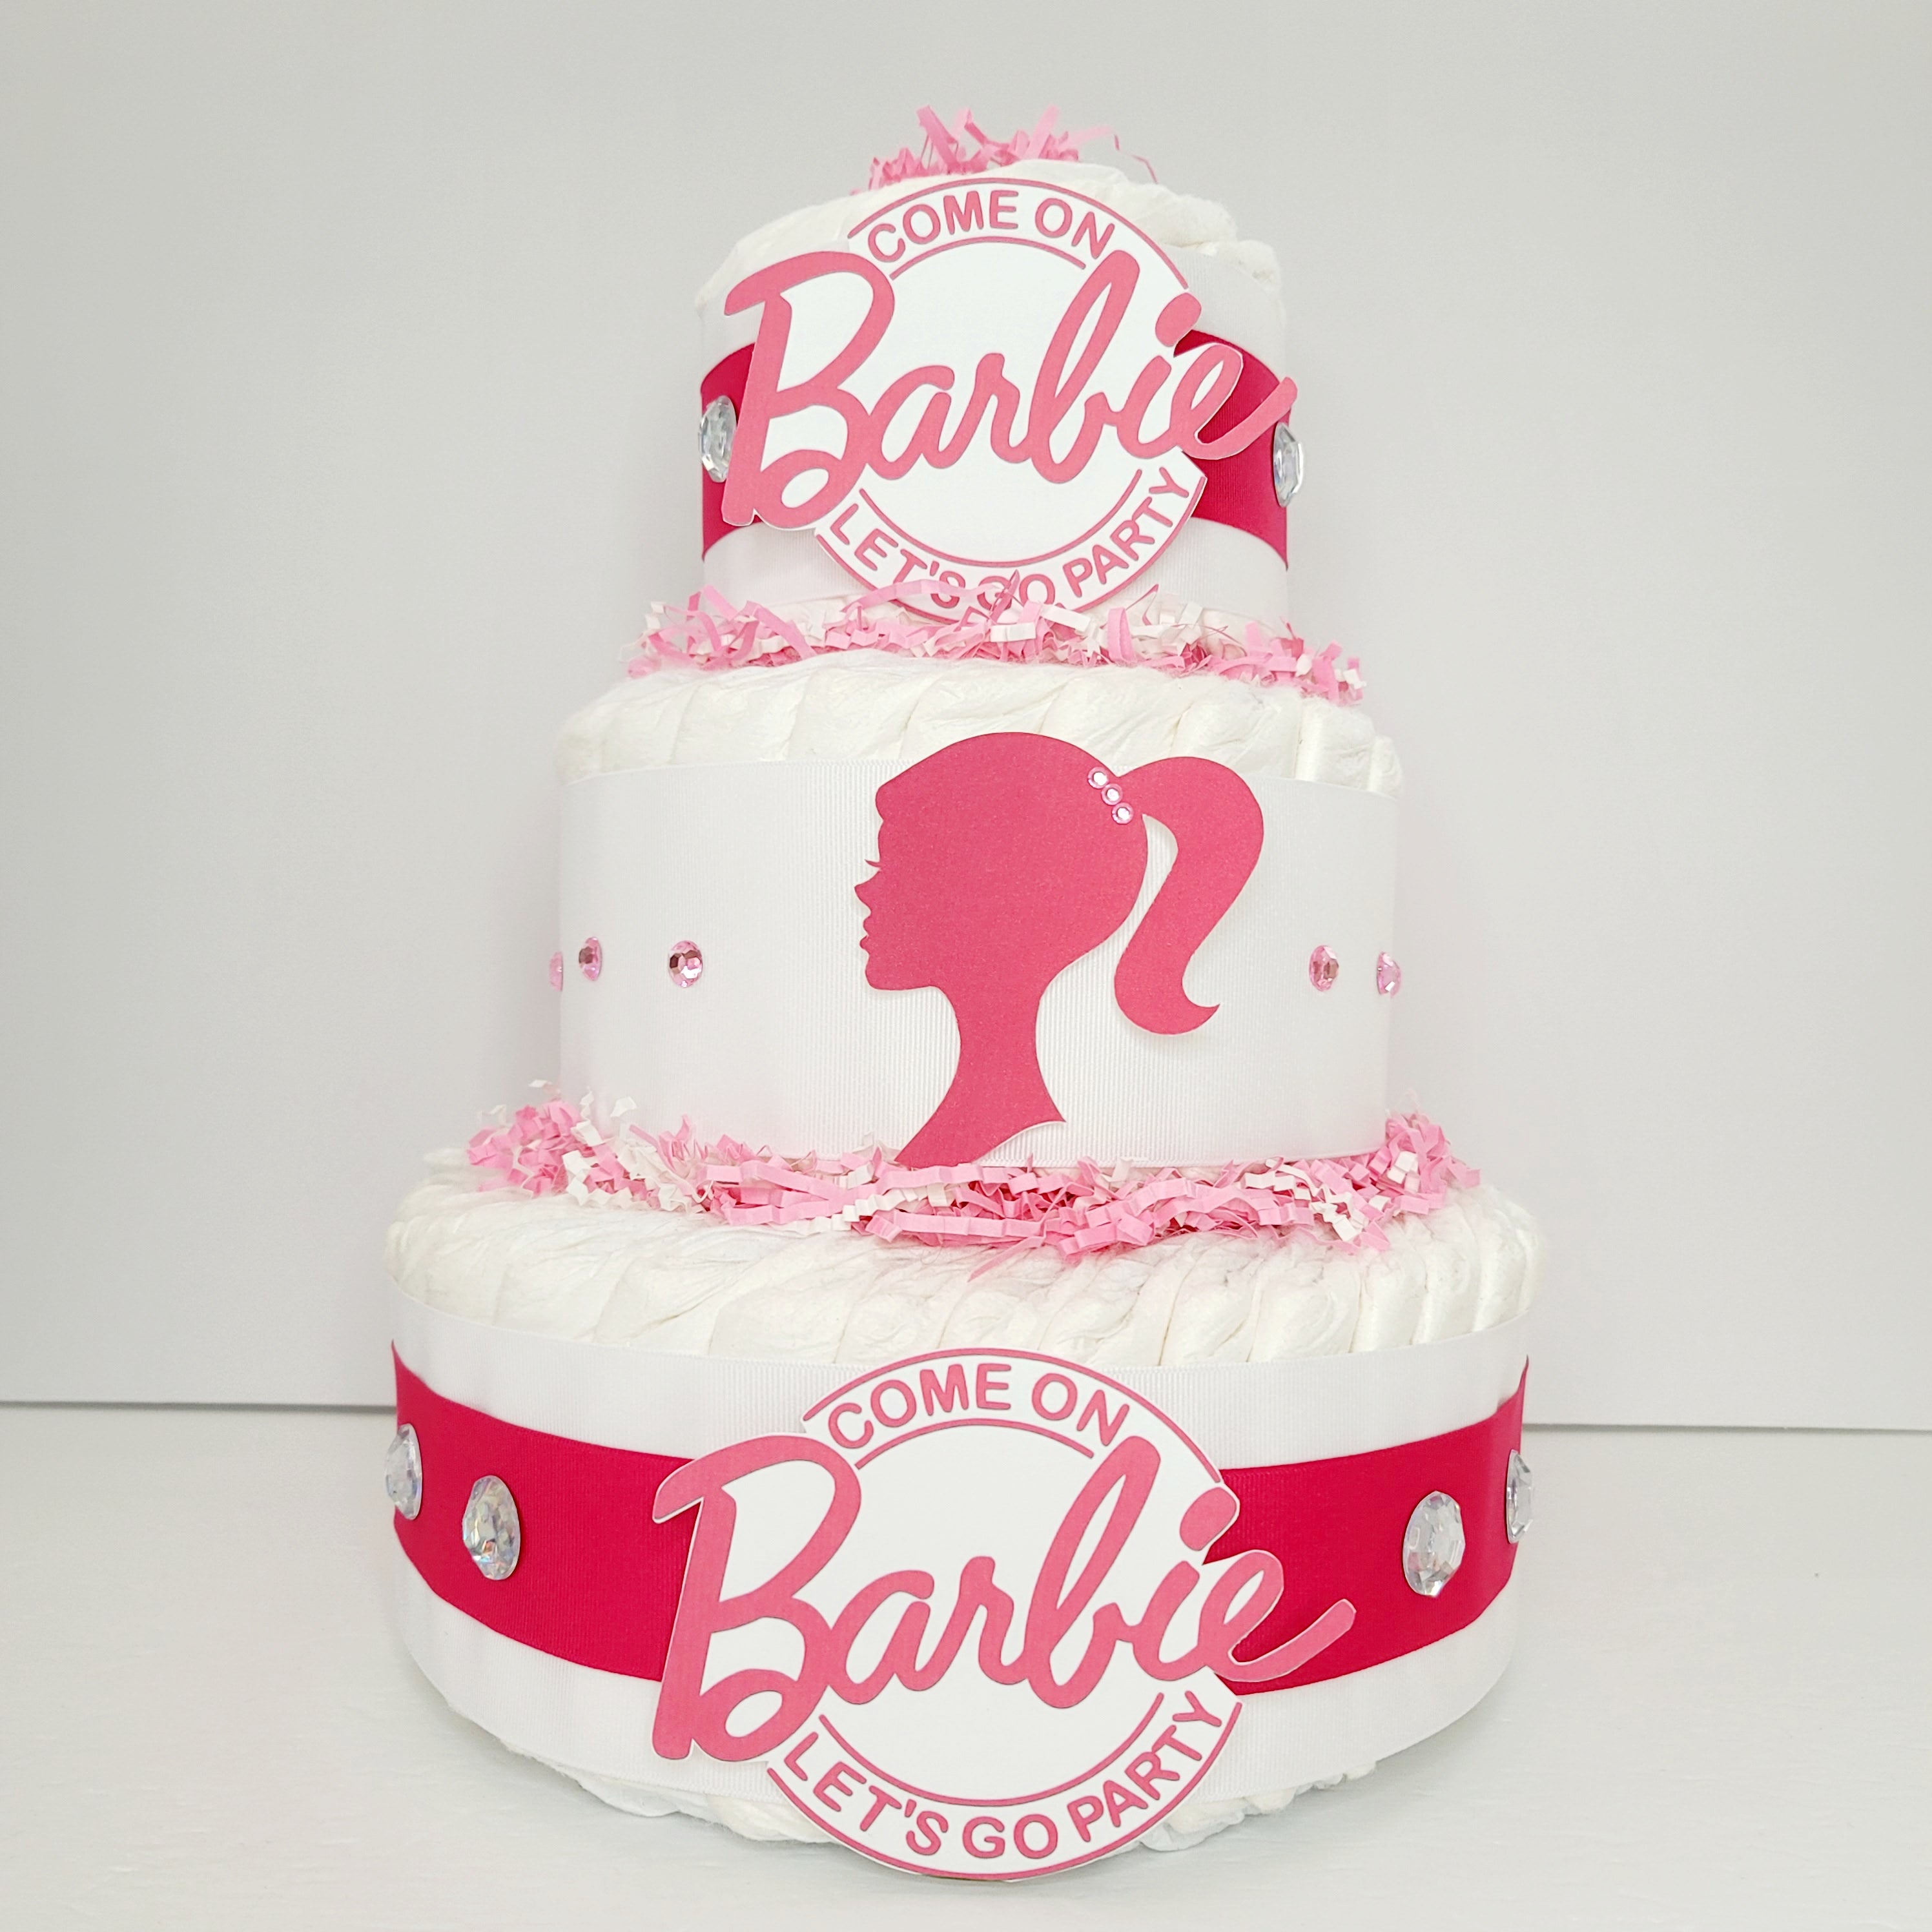 Barbie and mini doll cakes | The Cake Chick